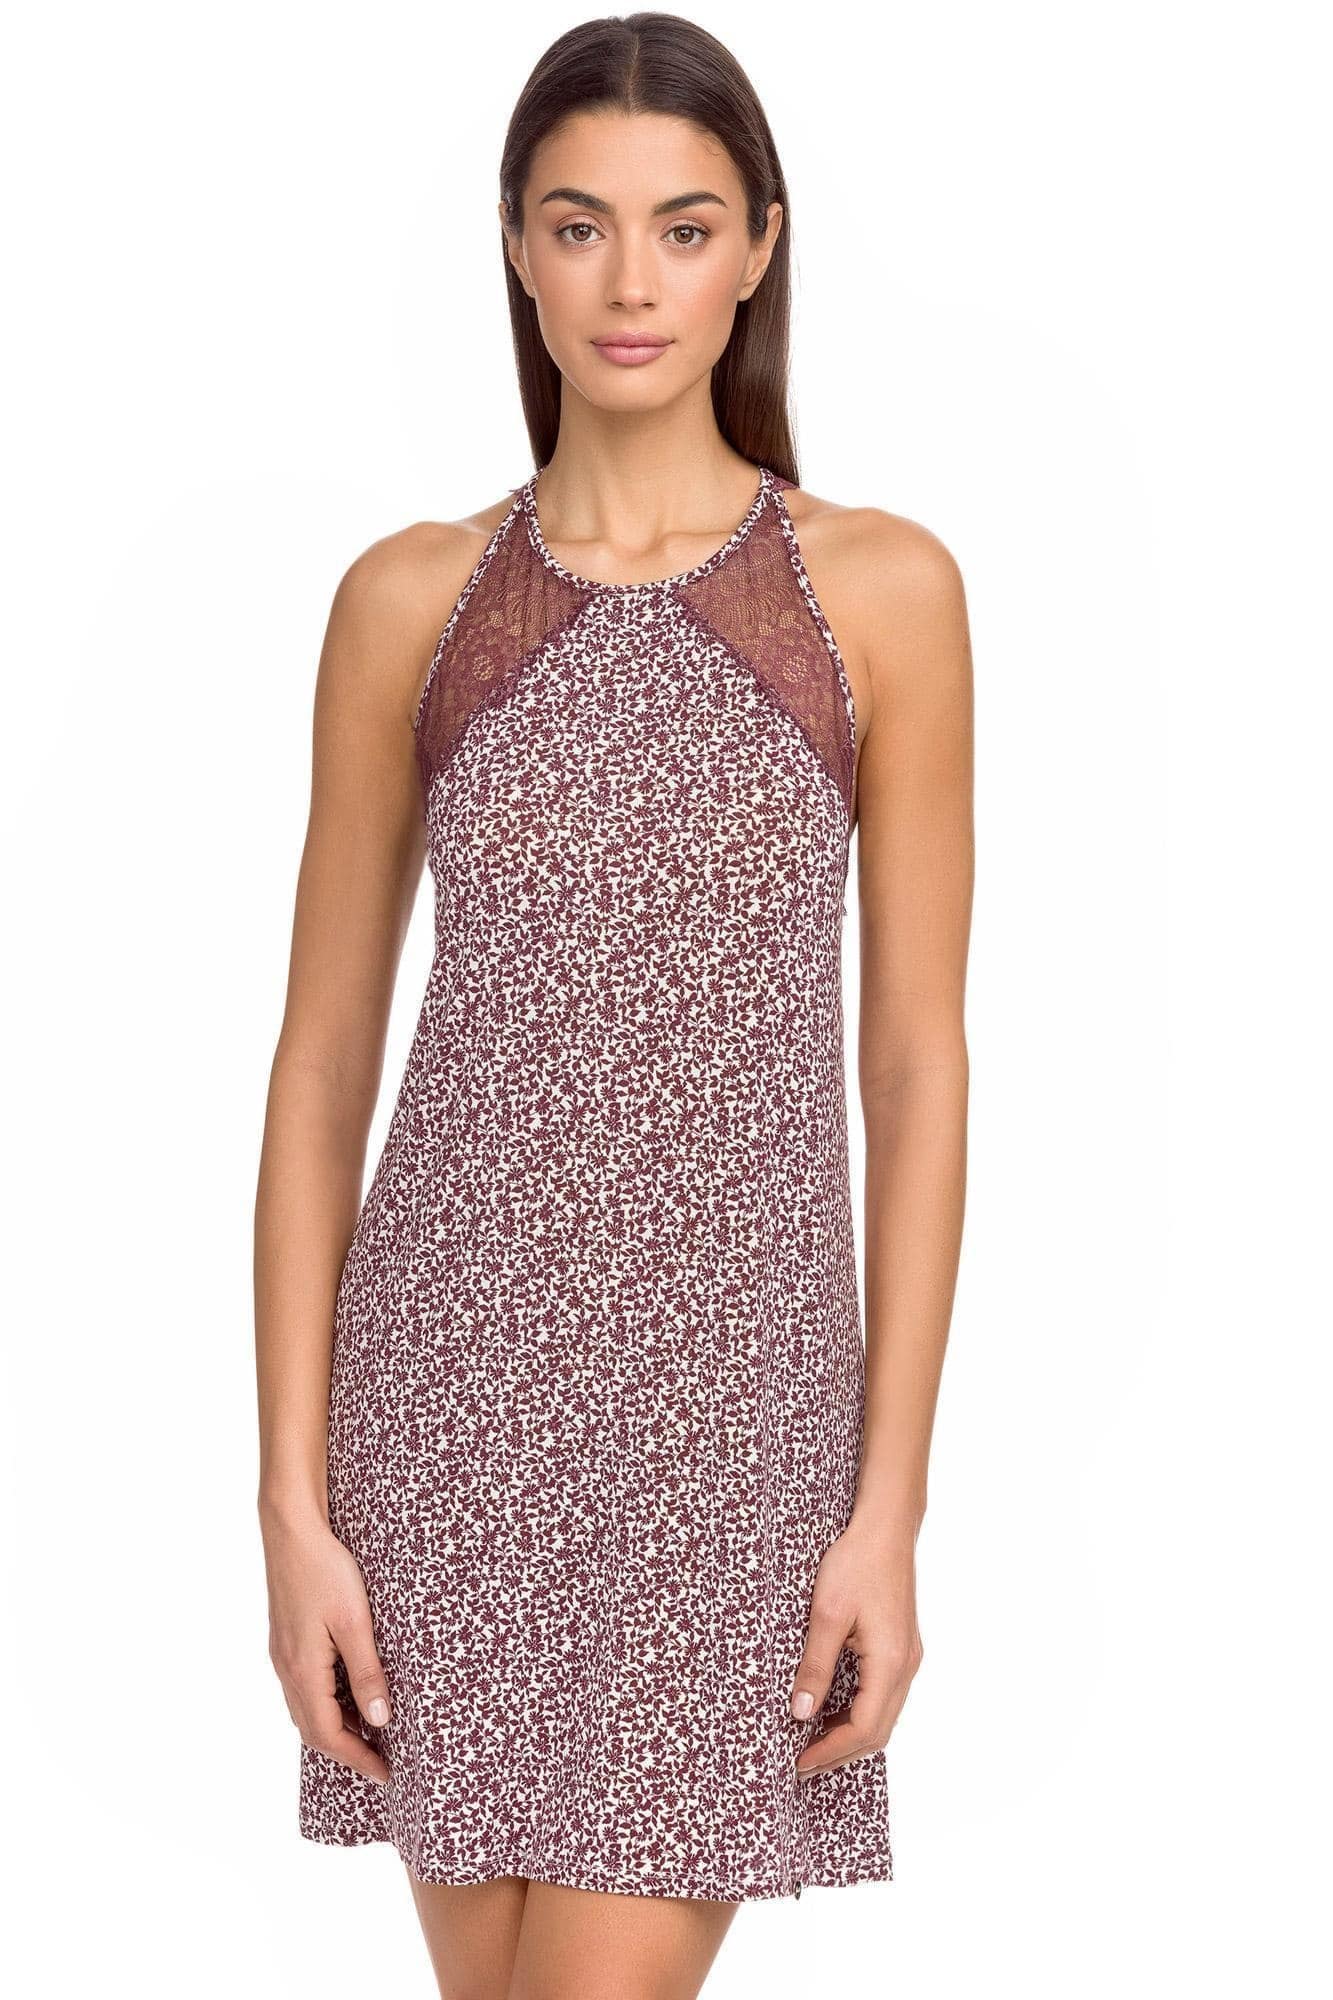 Women’s printed nightgown